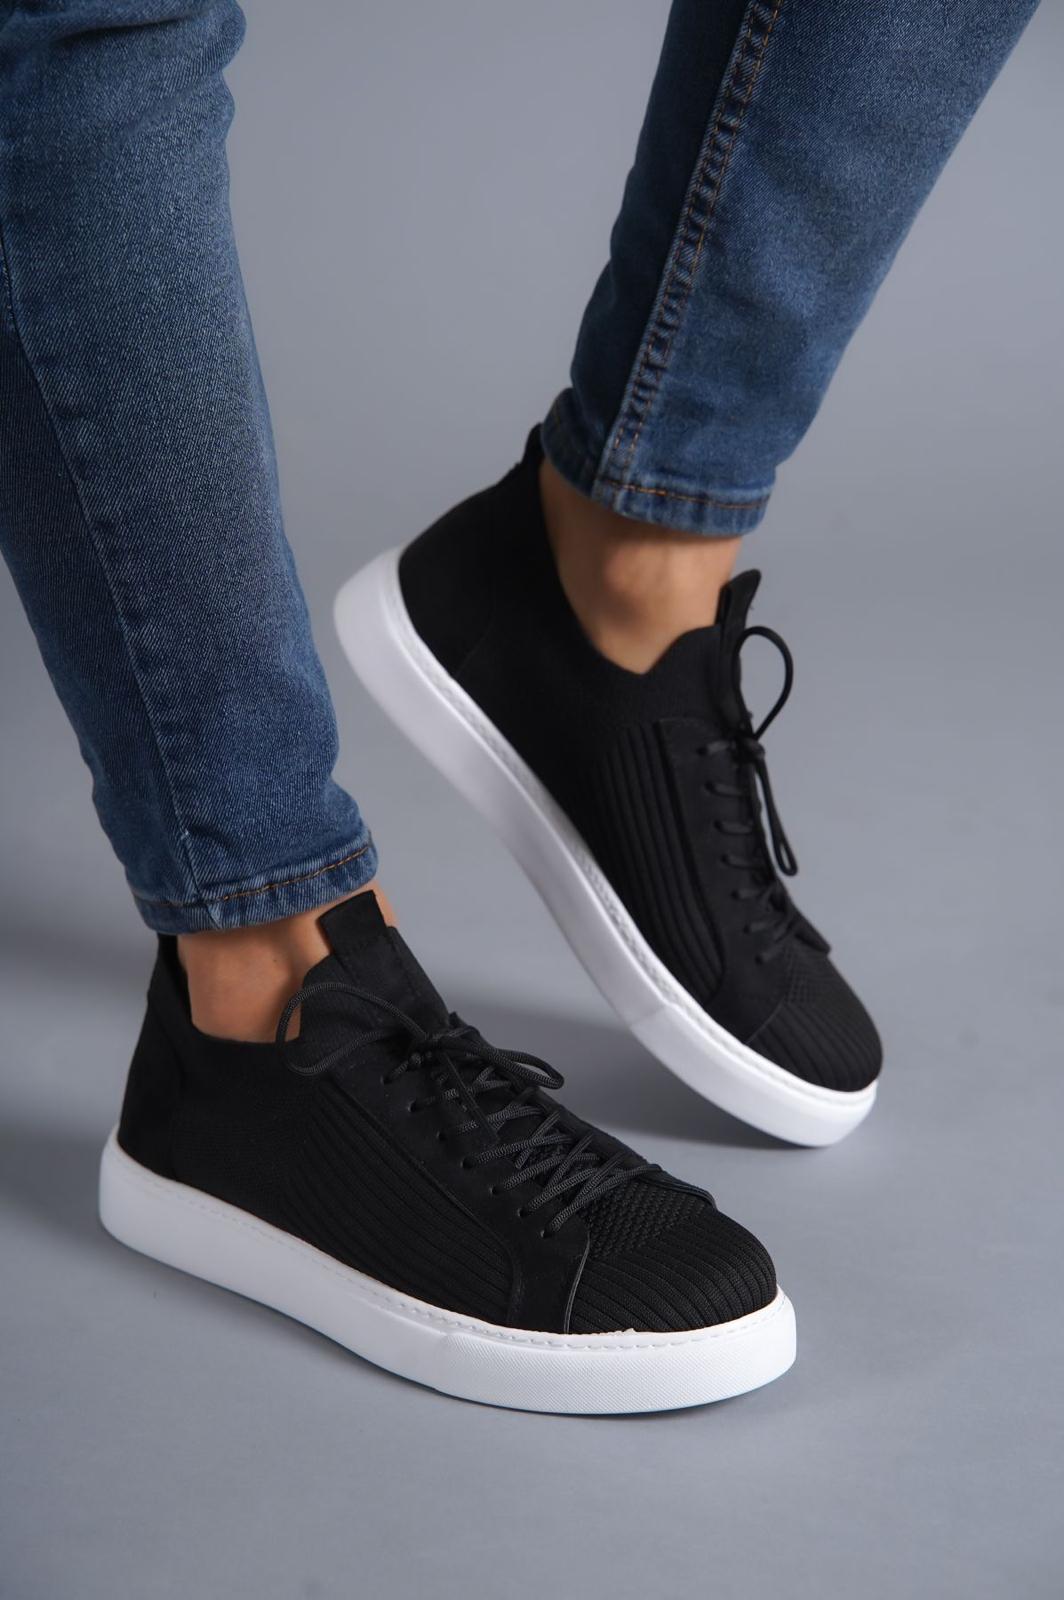 KB-112 Black Knitwear Lace-Up Casual Men's sneakers Shoes - STREETMODE ™